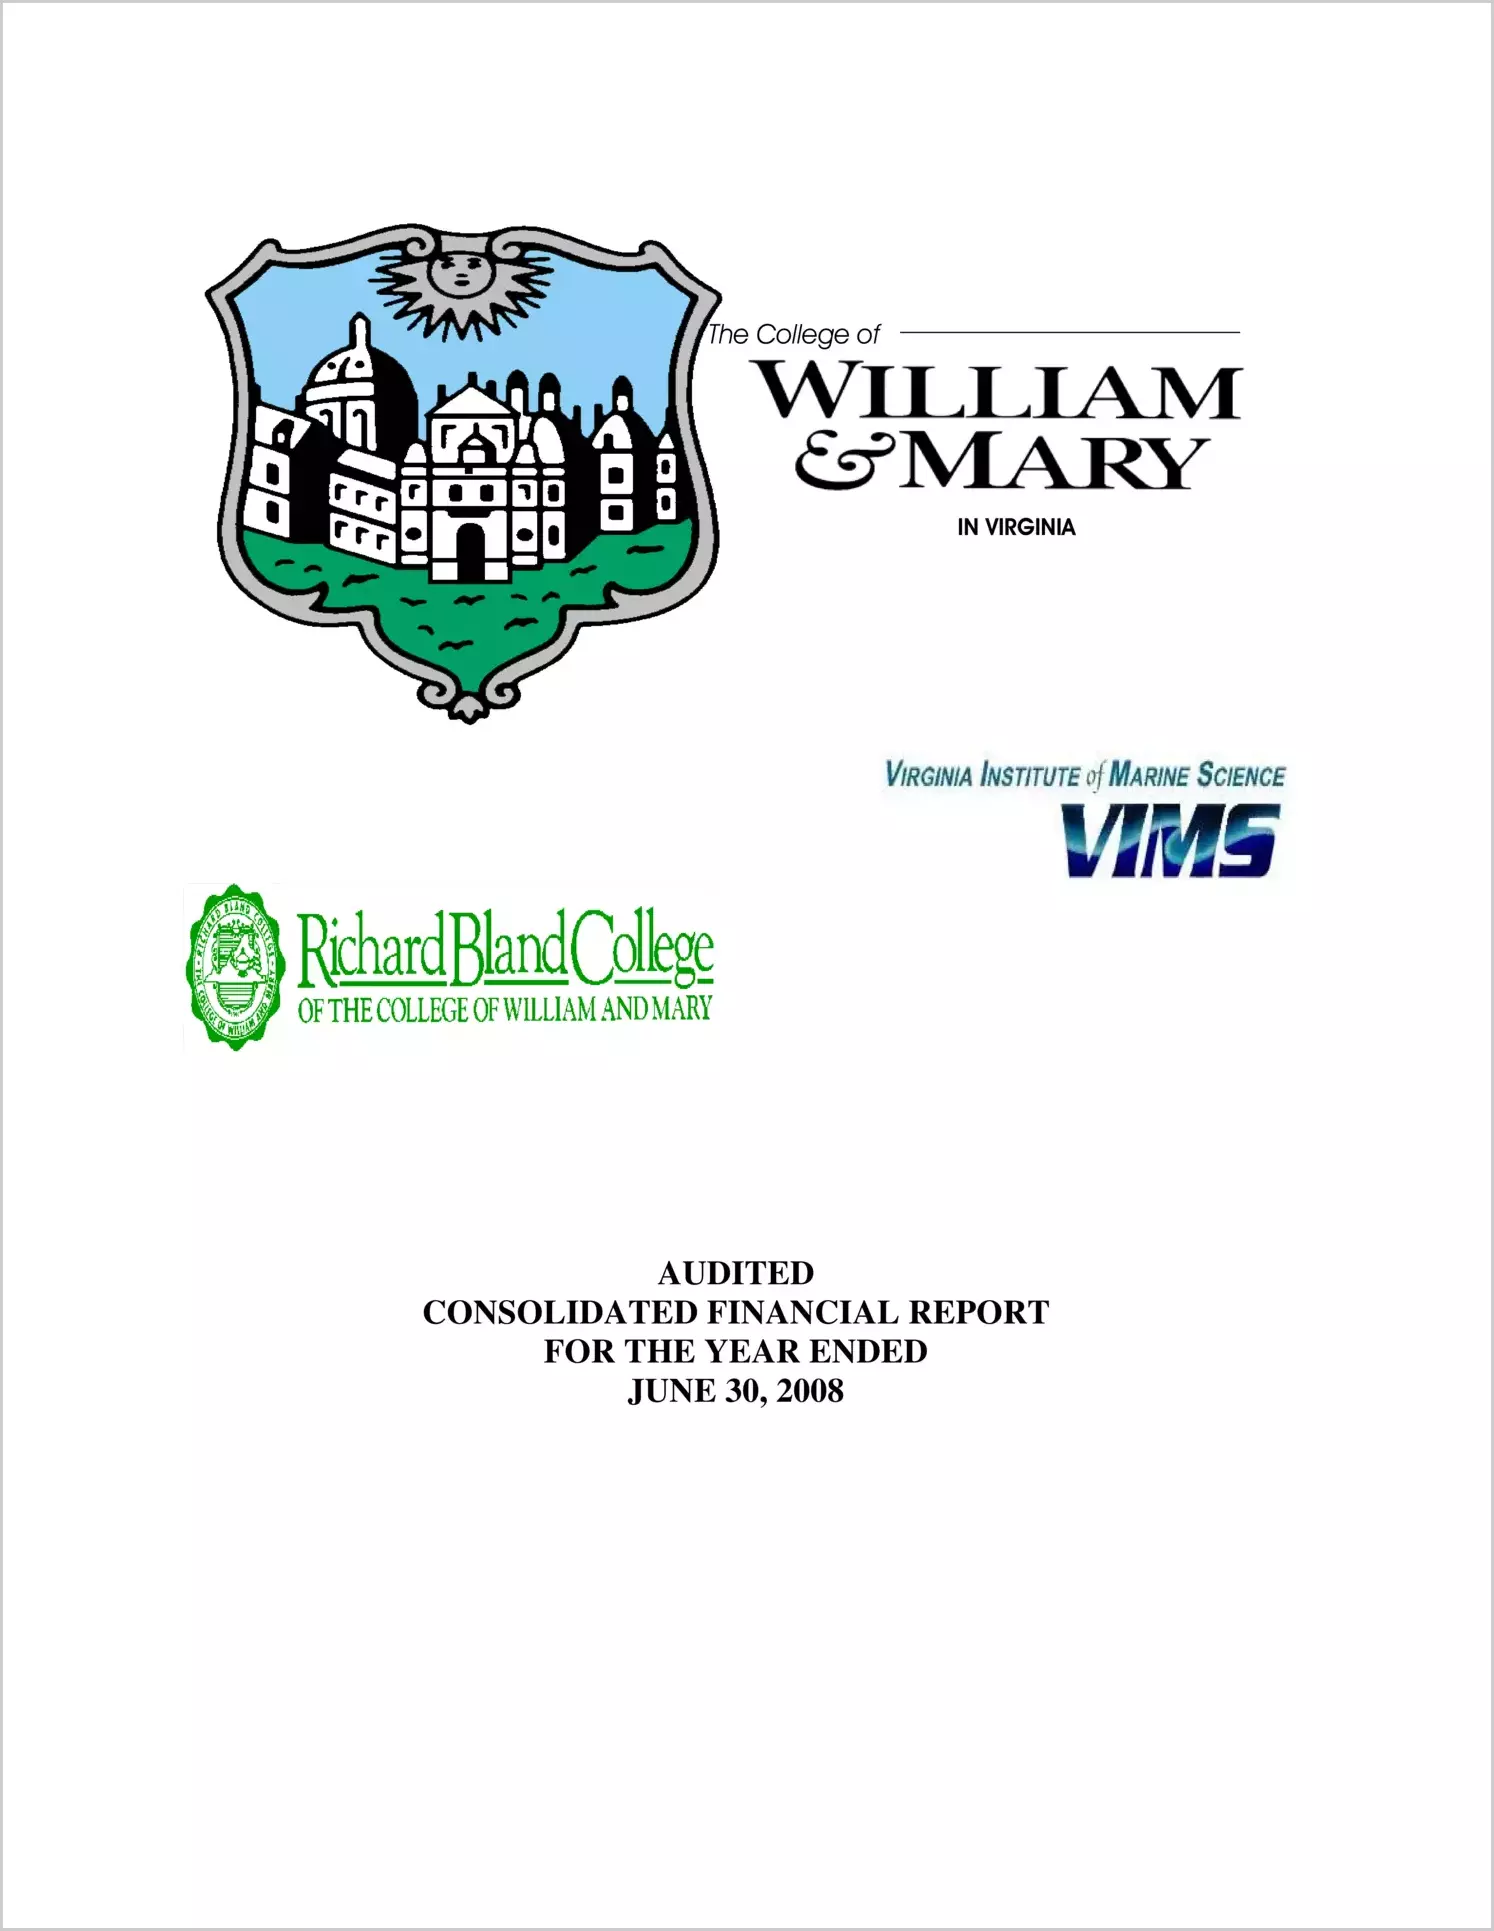 William & Mary, Virginia Institute of Marine Science, and Richard Bland College Financial Statements for the year ended June 30, 2008